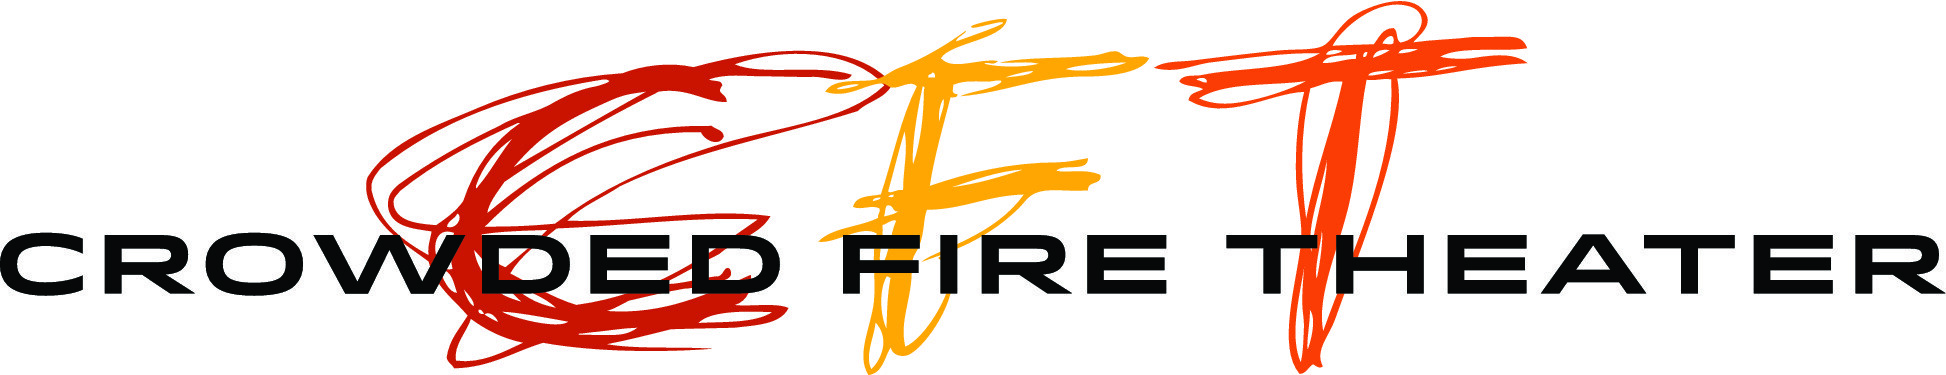 Logo for Crowded Fire Theater.